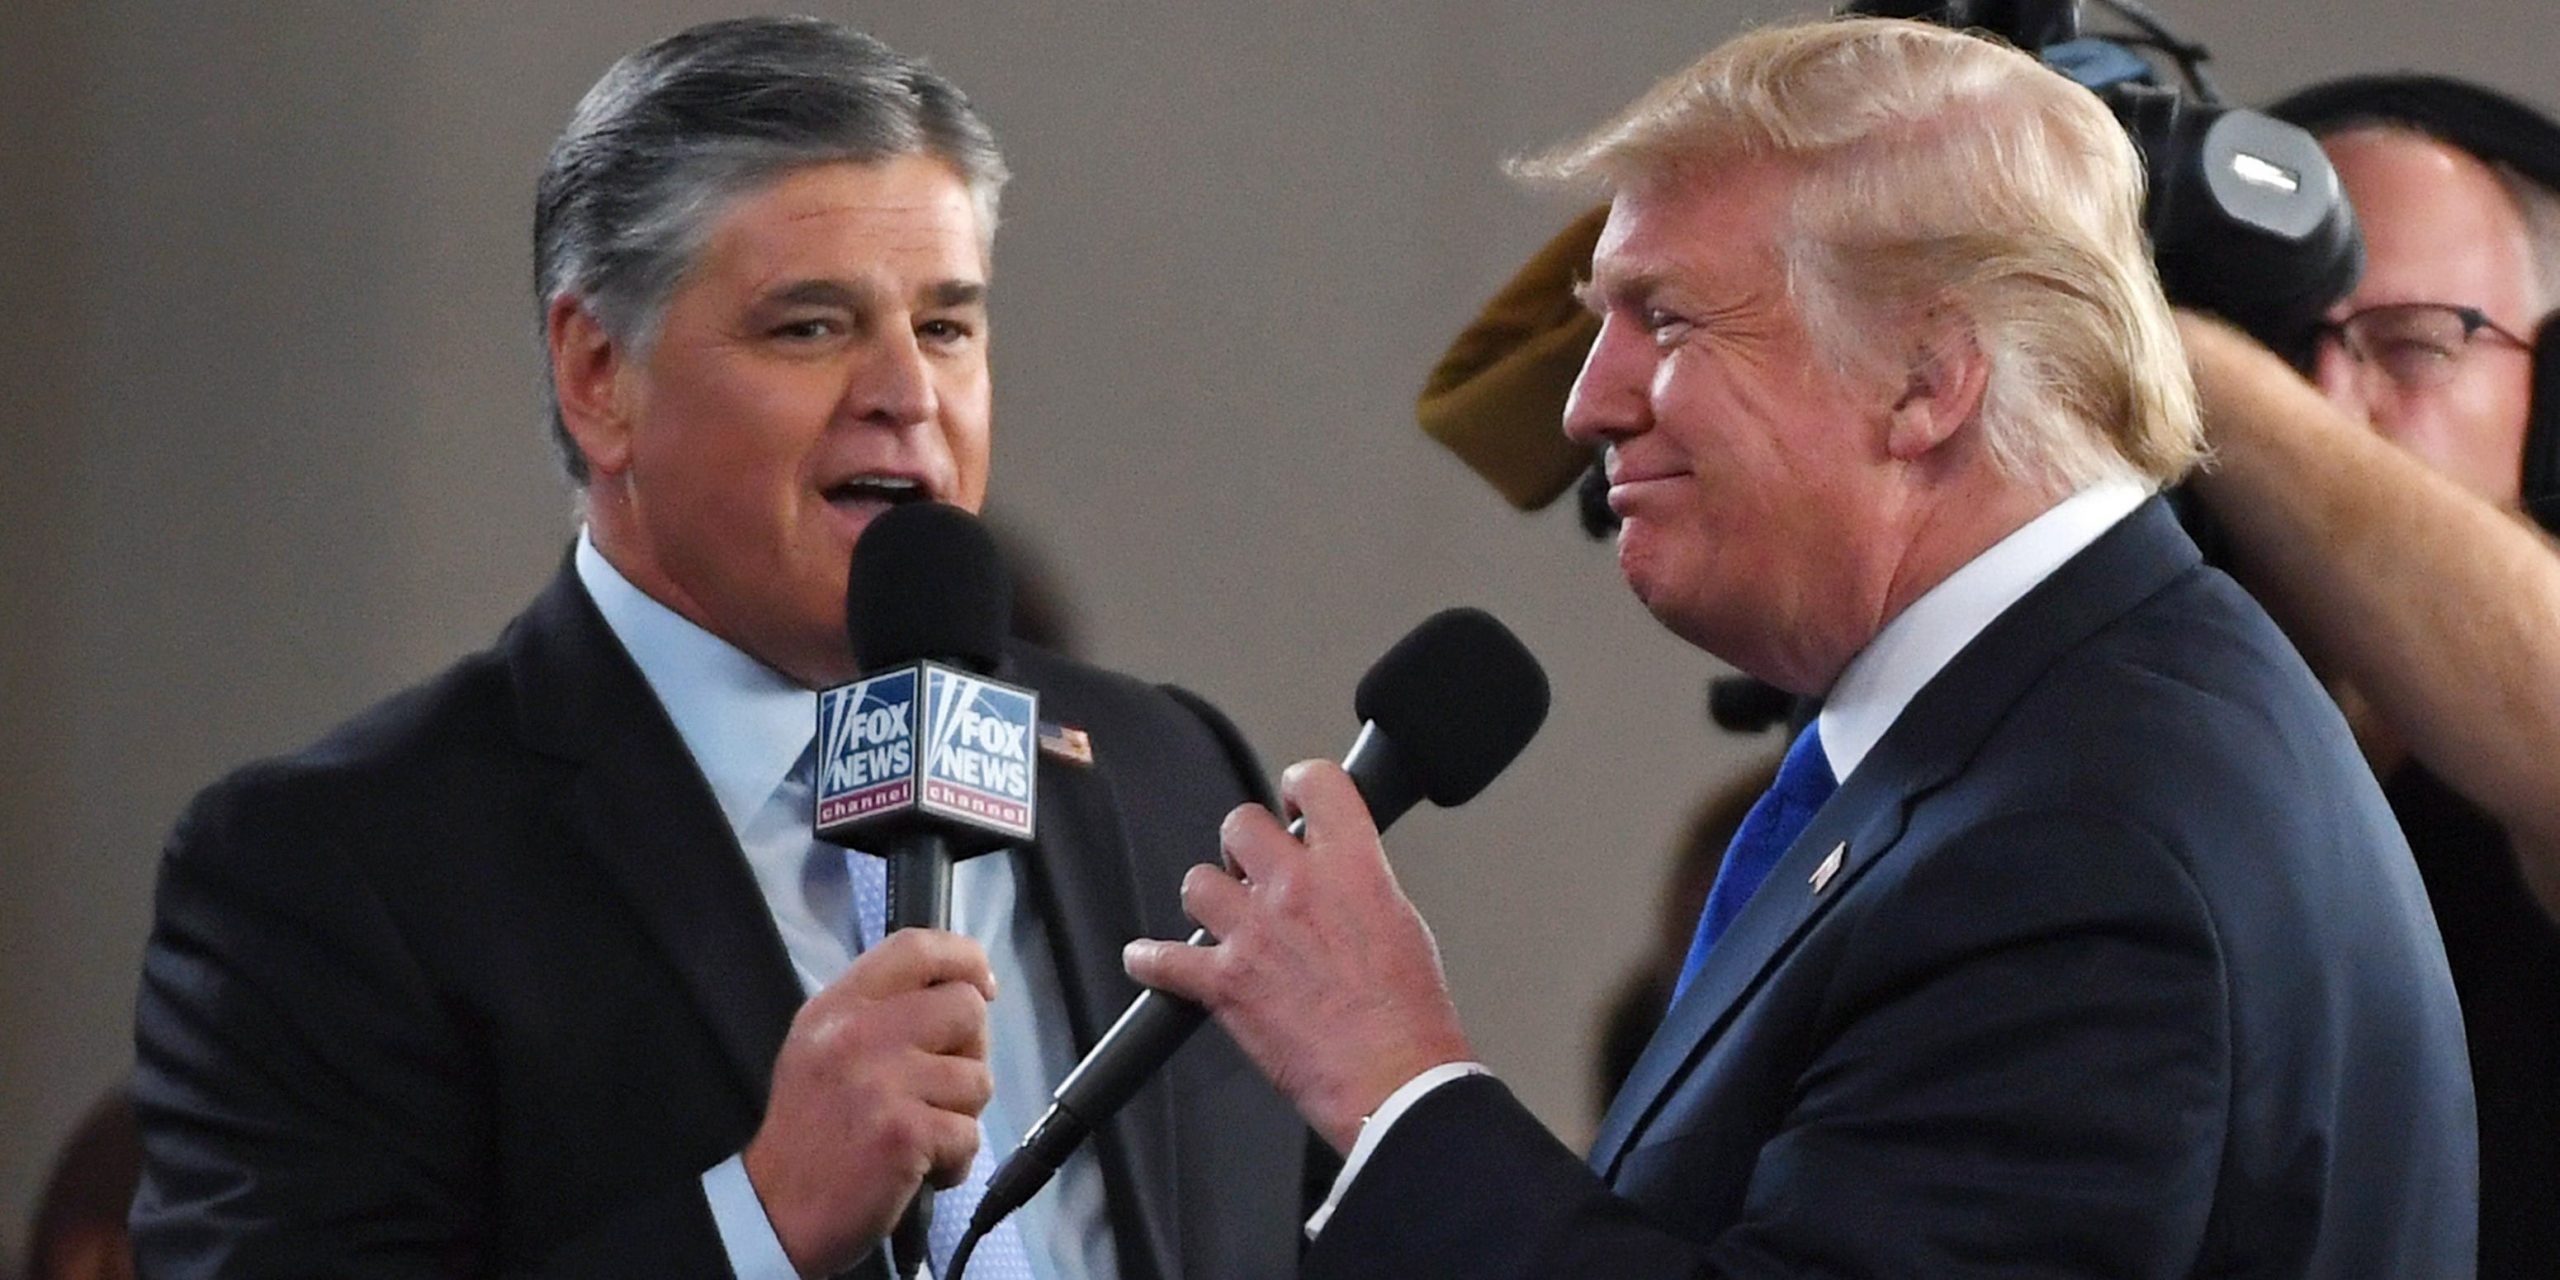 Fox News Channel and radio talk show host Sean Hannity (L) interviews U.S. President Donald Trump before a campaign rally at the Las Vegas Convention Center on September 20, 2018 in Las Vegas, Nevada.